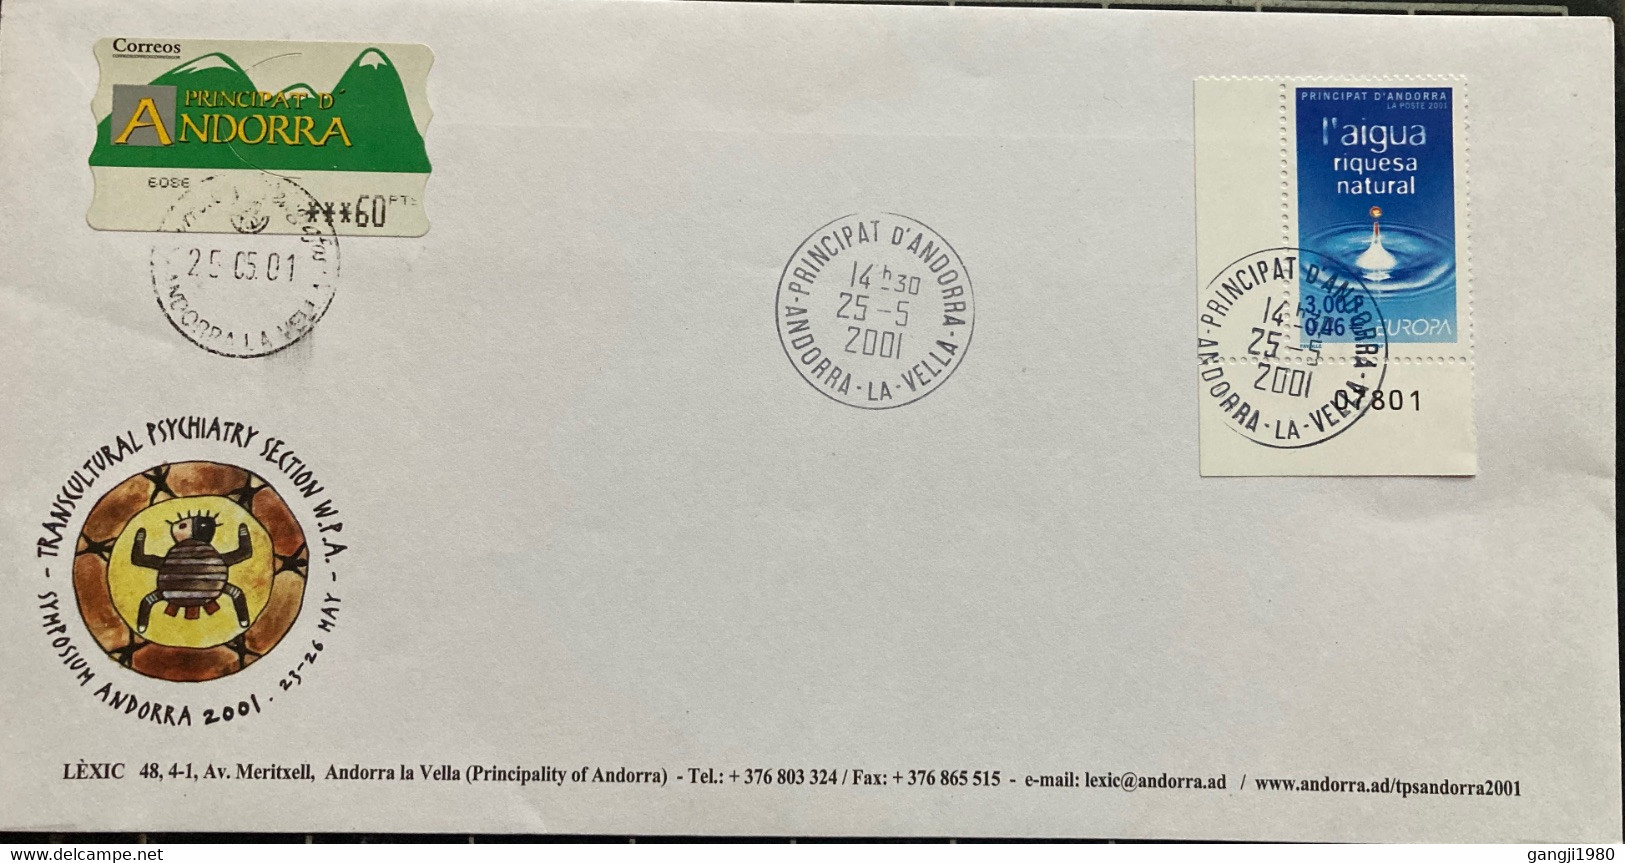 ANDORRA 2001,TRANSCULTURAL PSYCHOLOGY,ILLUSTRATED SPECIAL USED COVER, EUROPA,NAIGUA RIQUESA NATURAL, STAMP PLATET NUMBER - Lettres & Documents